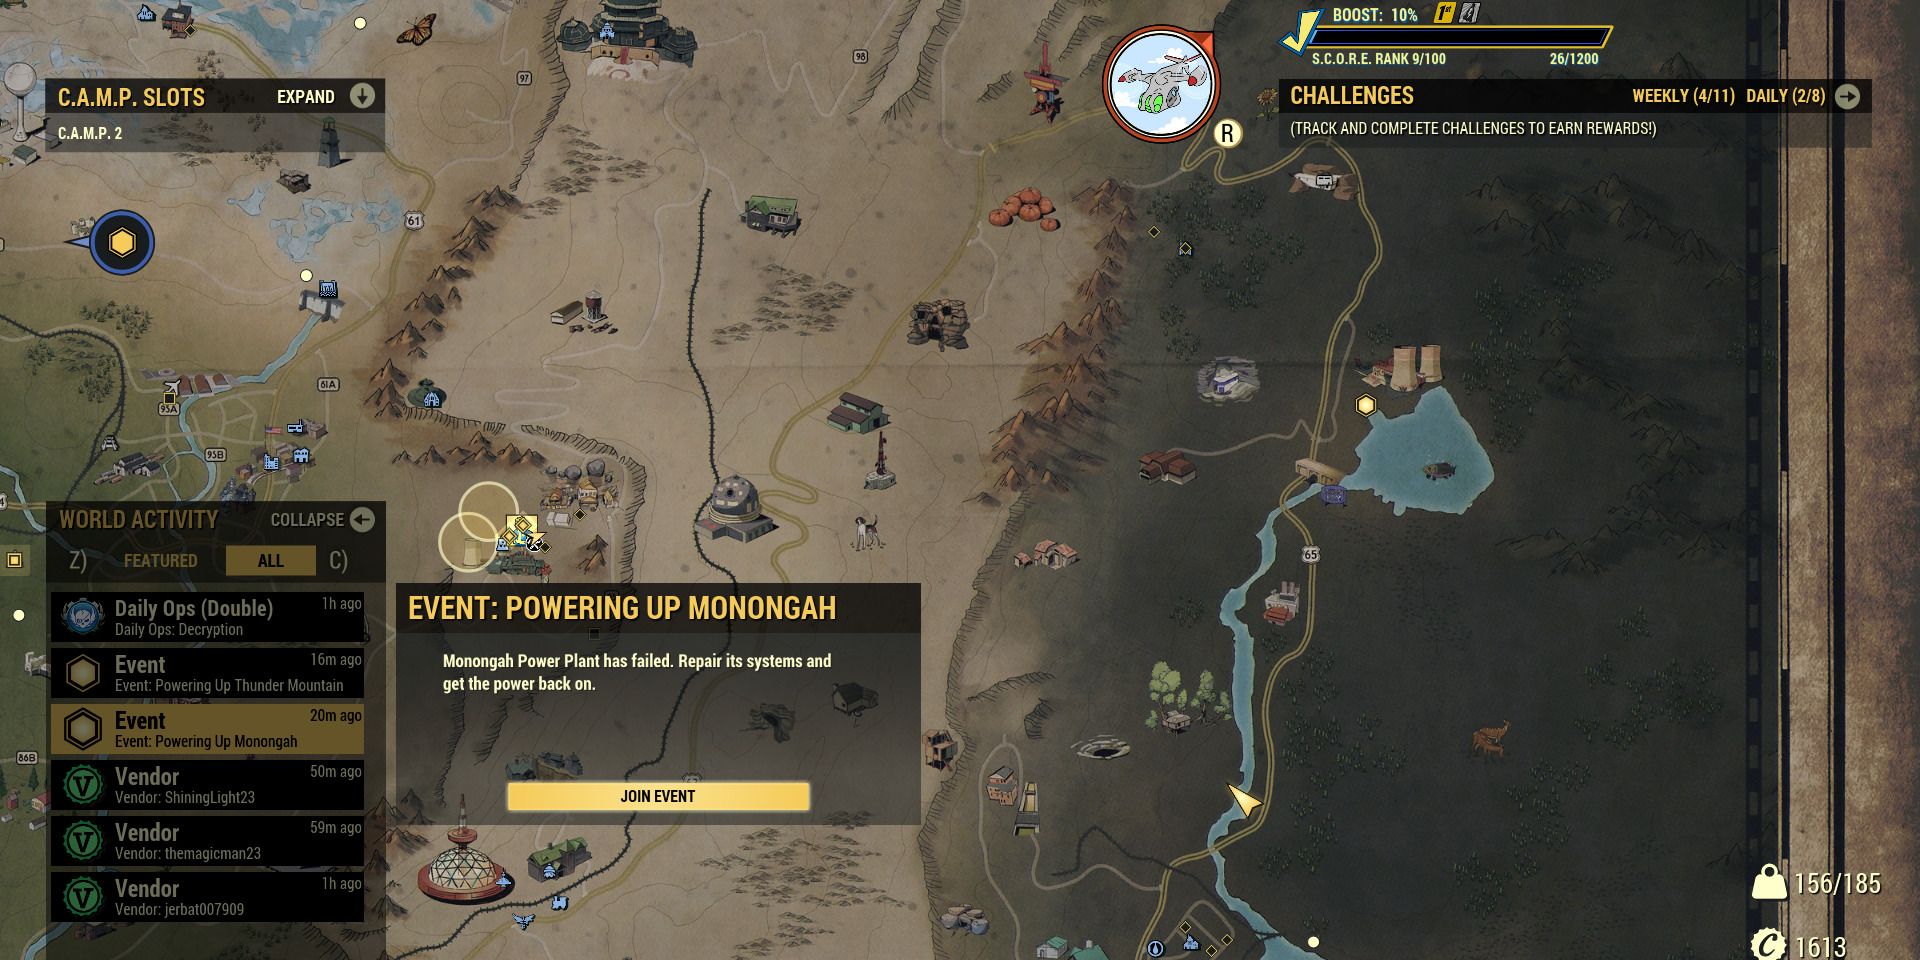 Image of some events on the map in Fallout 76